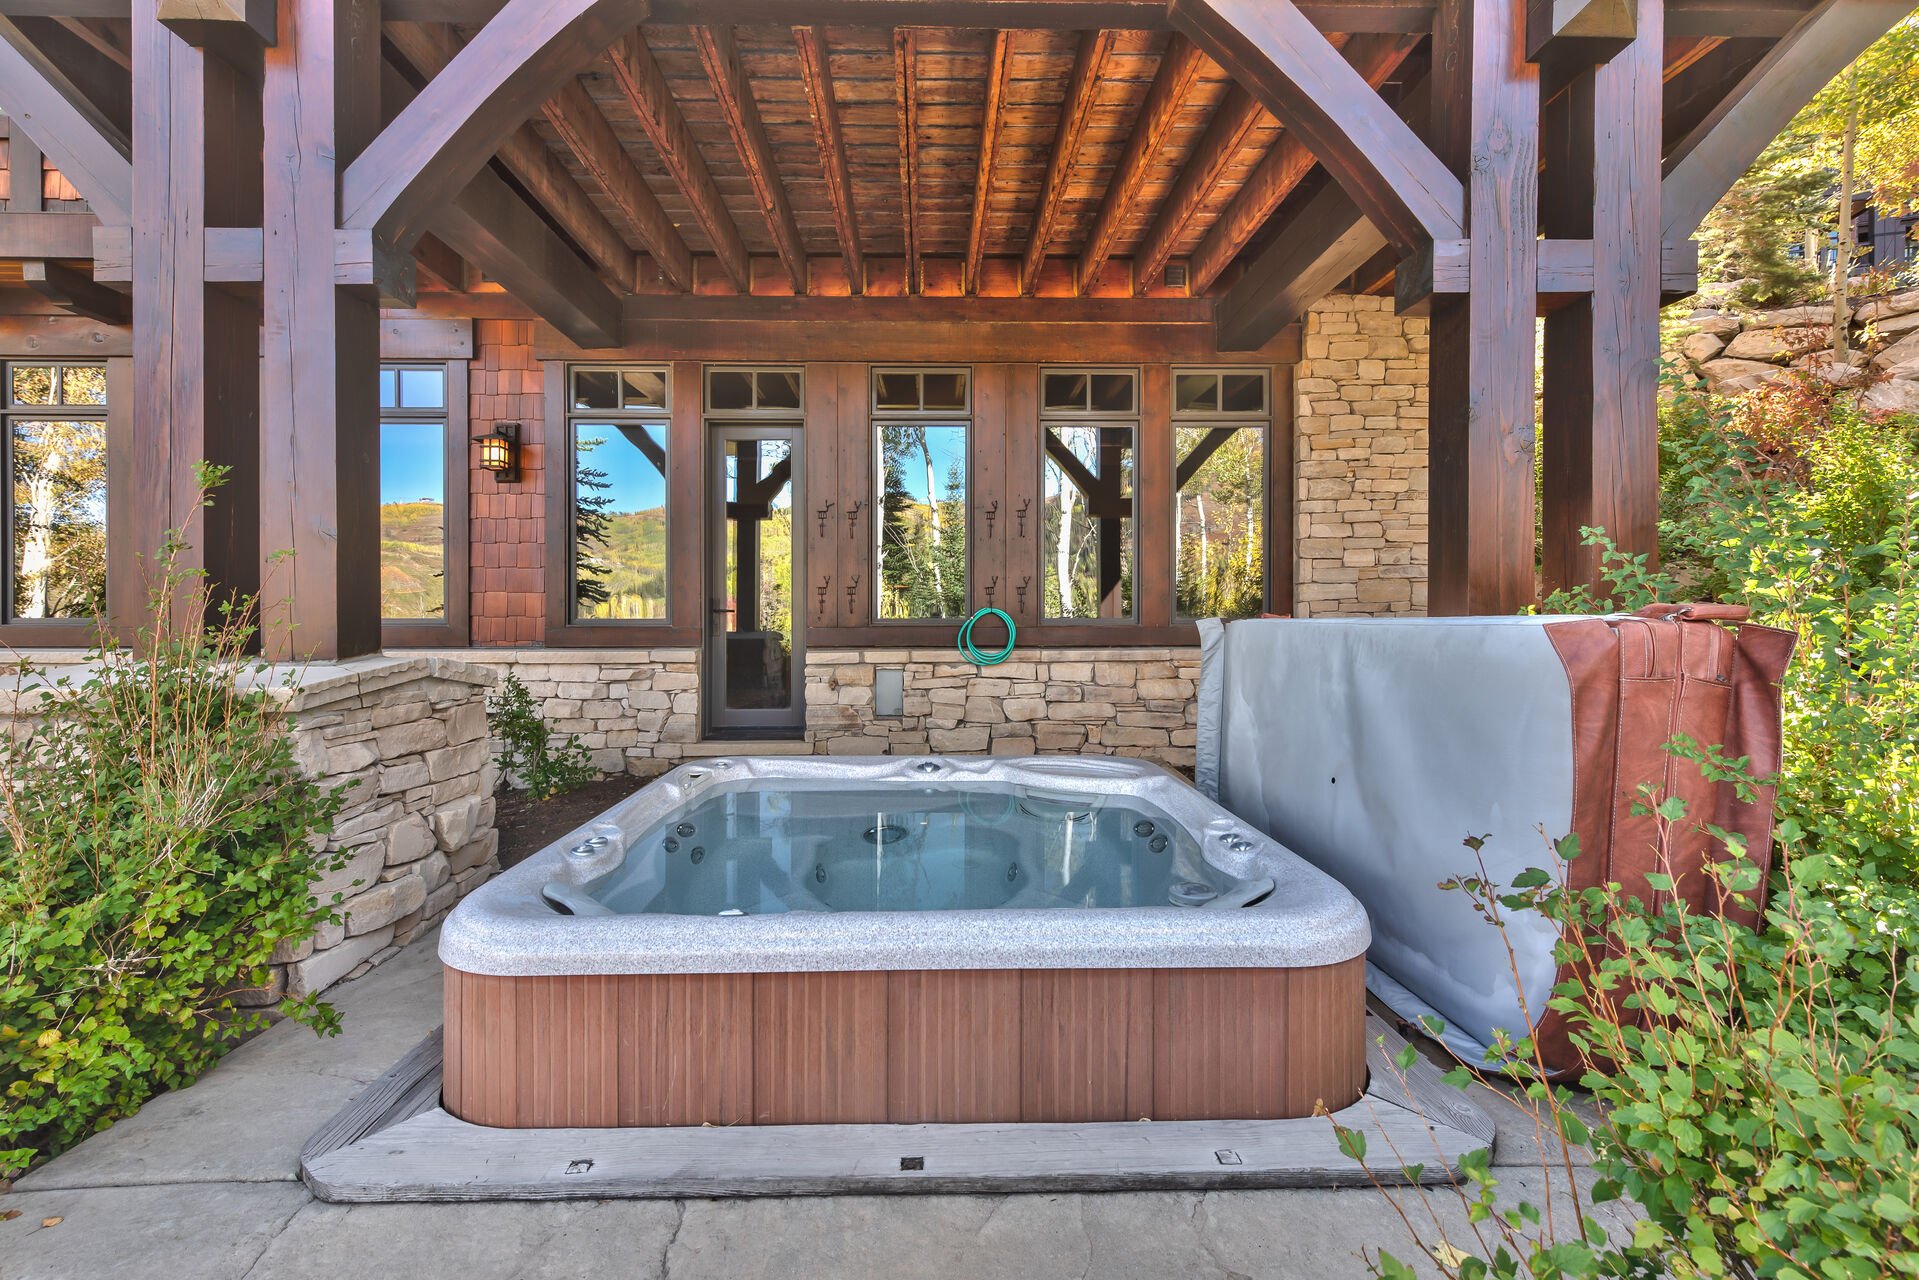 6-Person Hot Tub on Back Patio